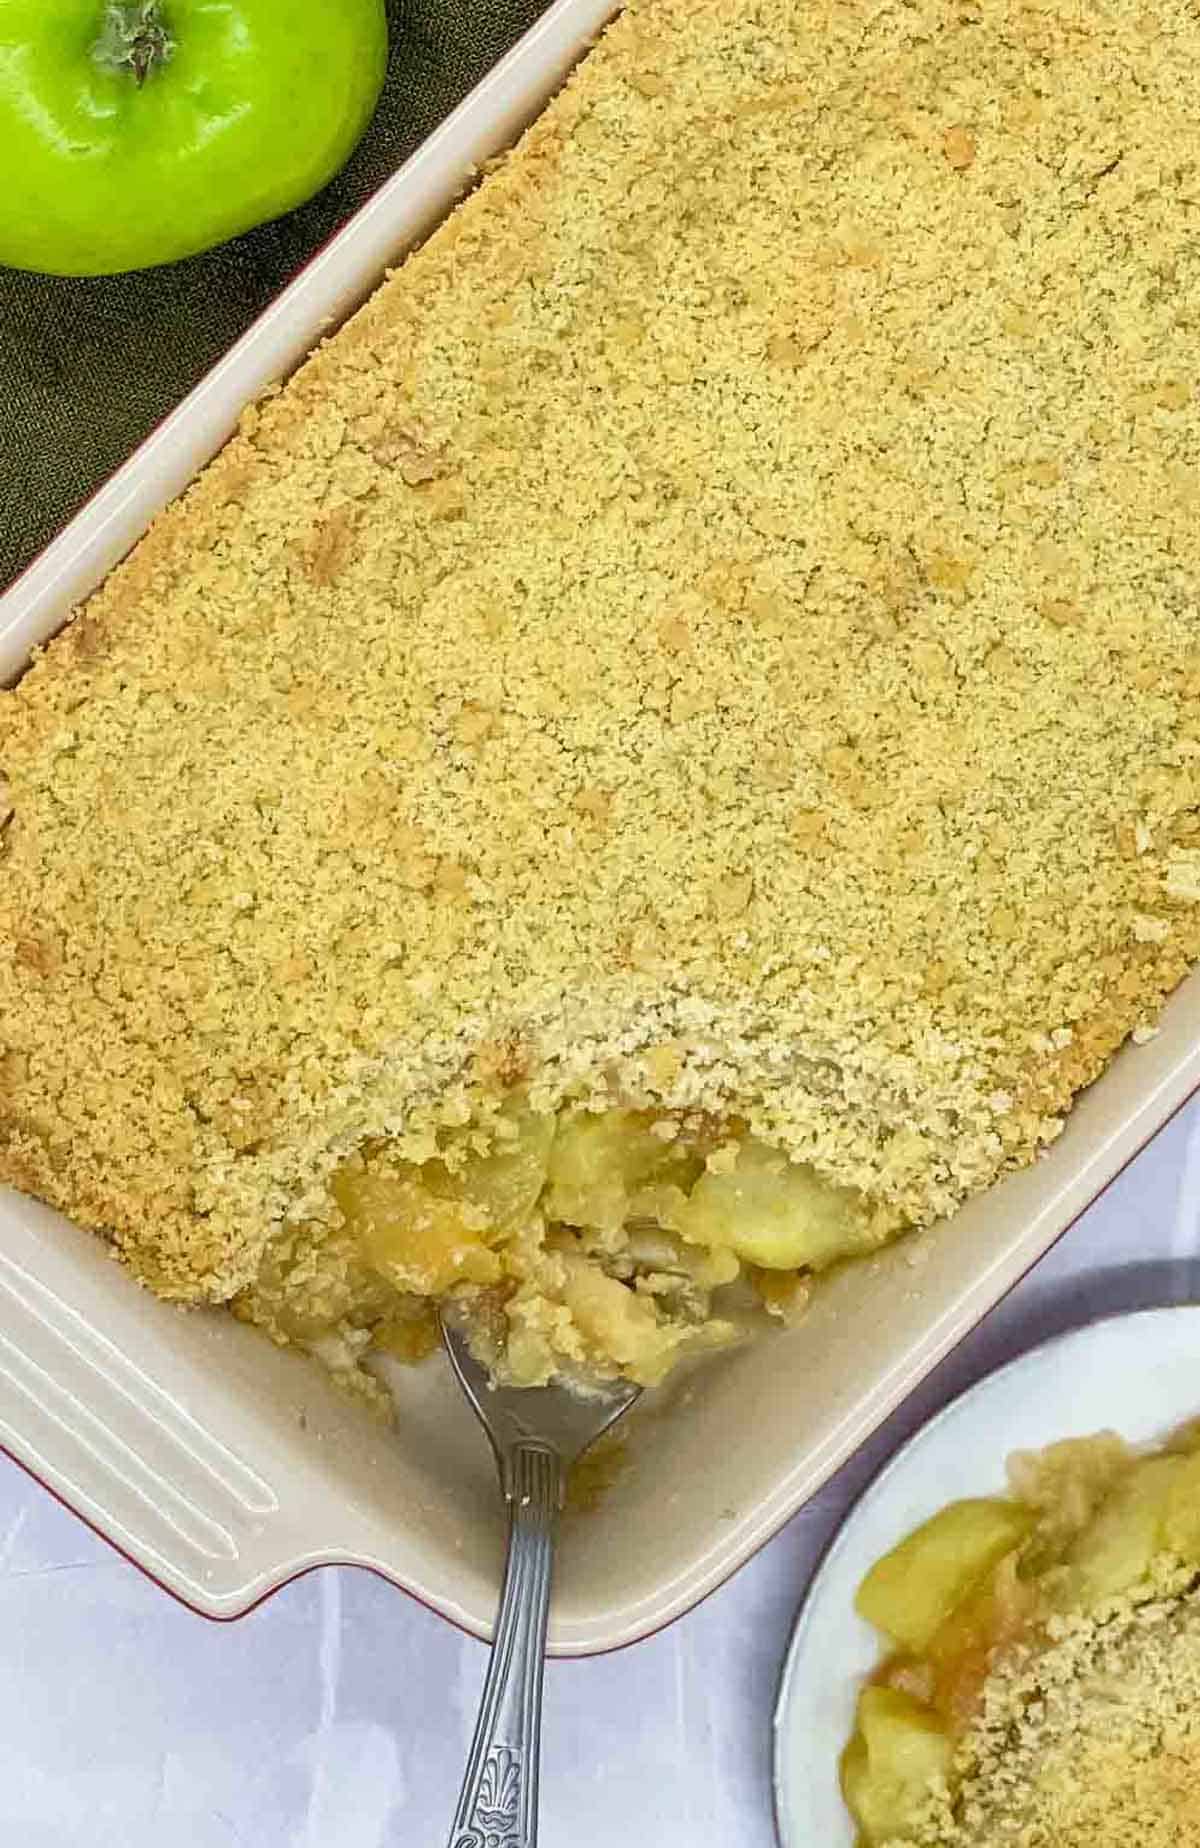 Apple crumble in a baking dish with a portion on a plate and serving spoon in the baking dish.